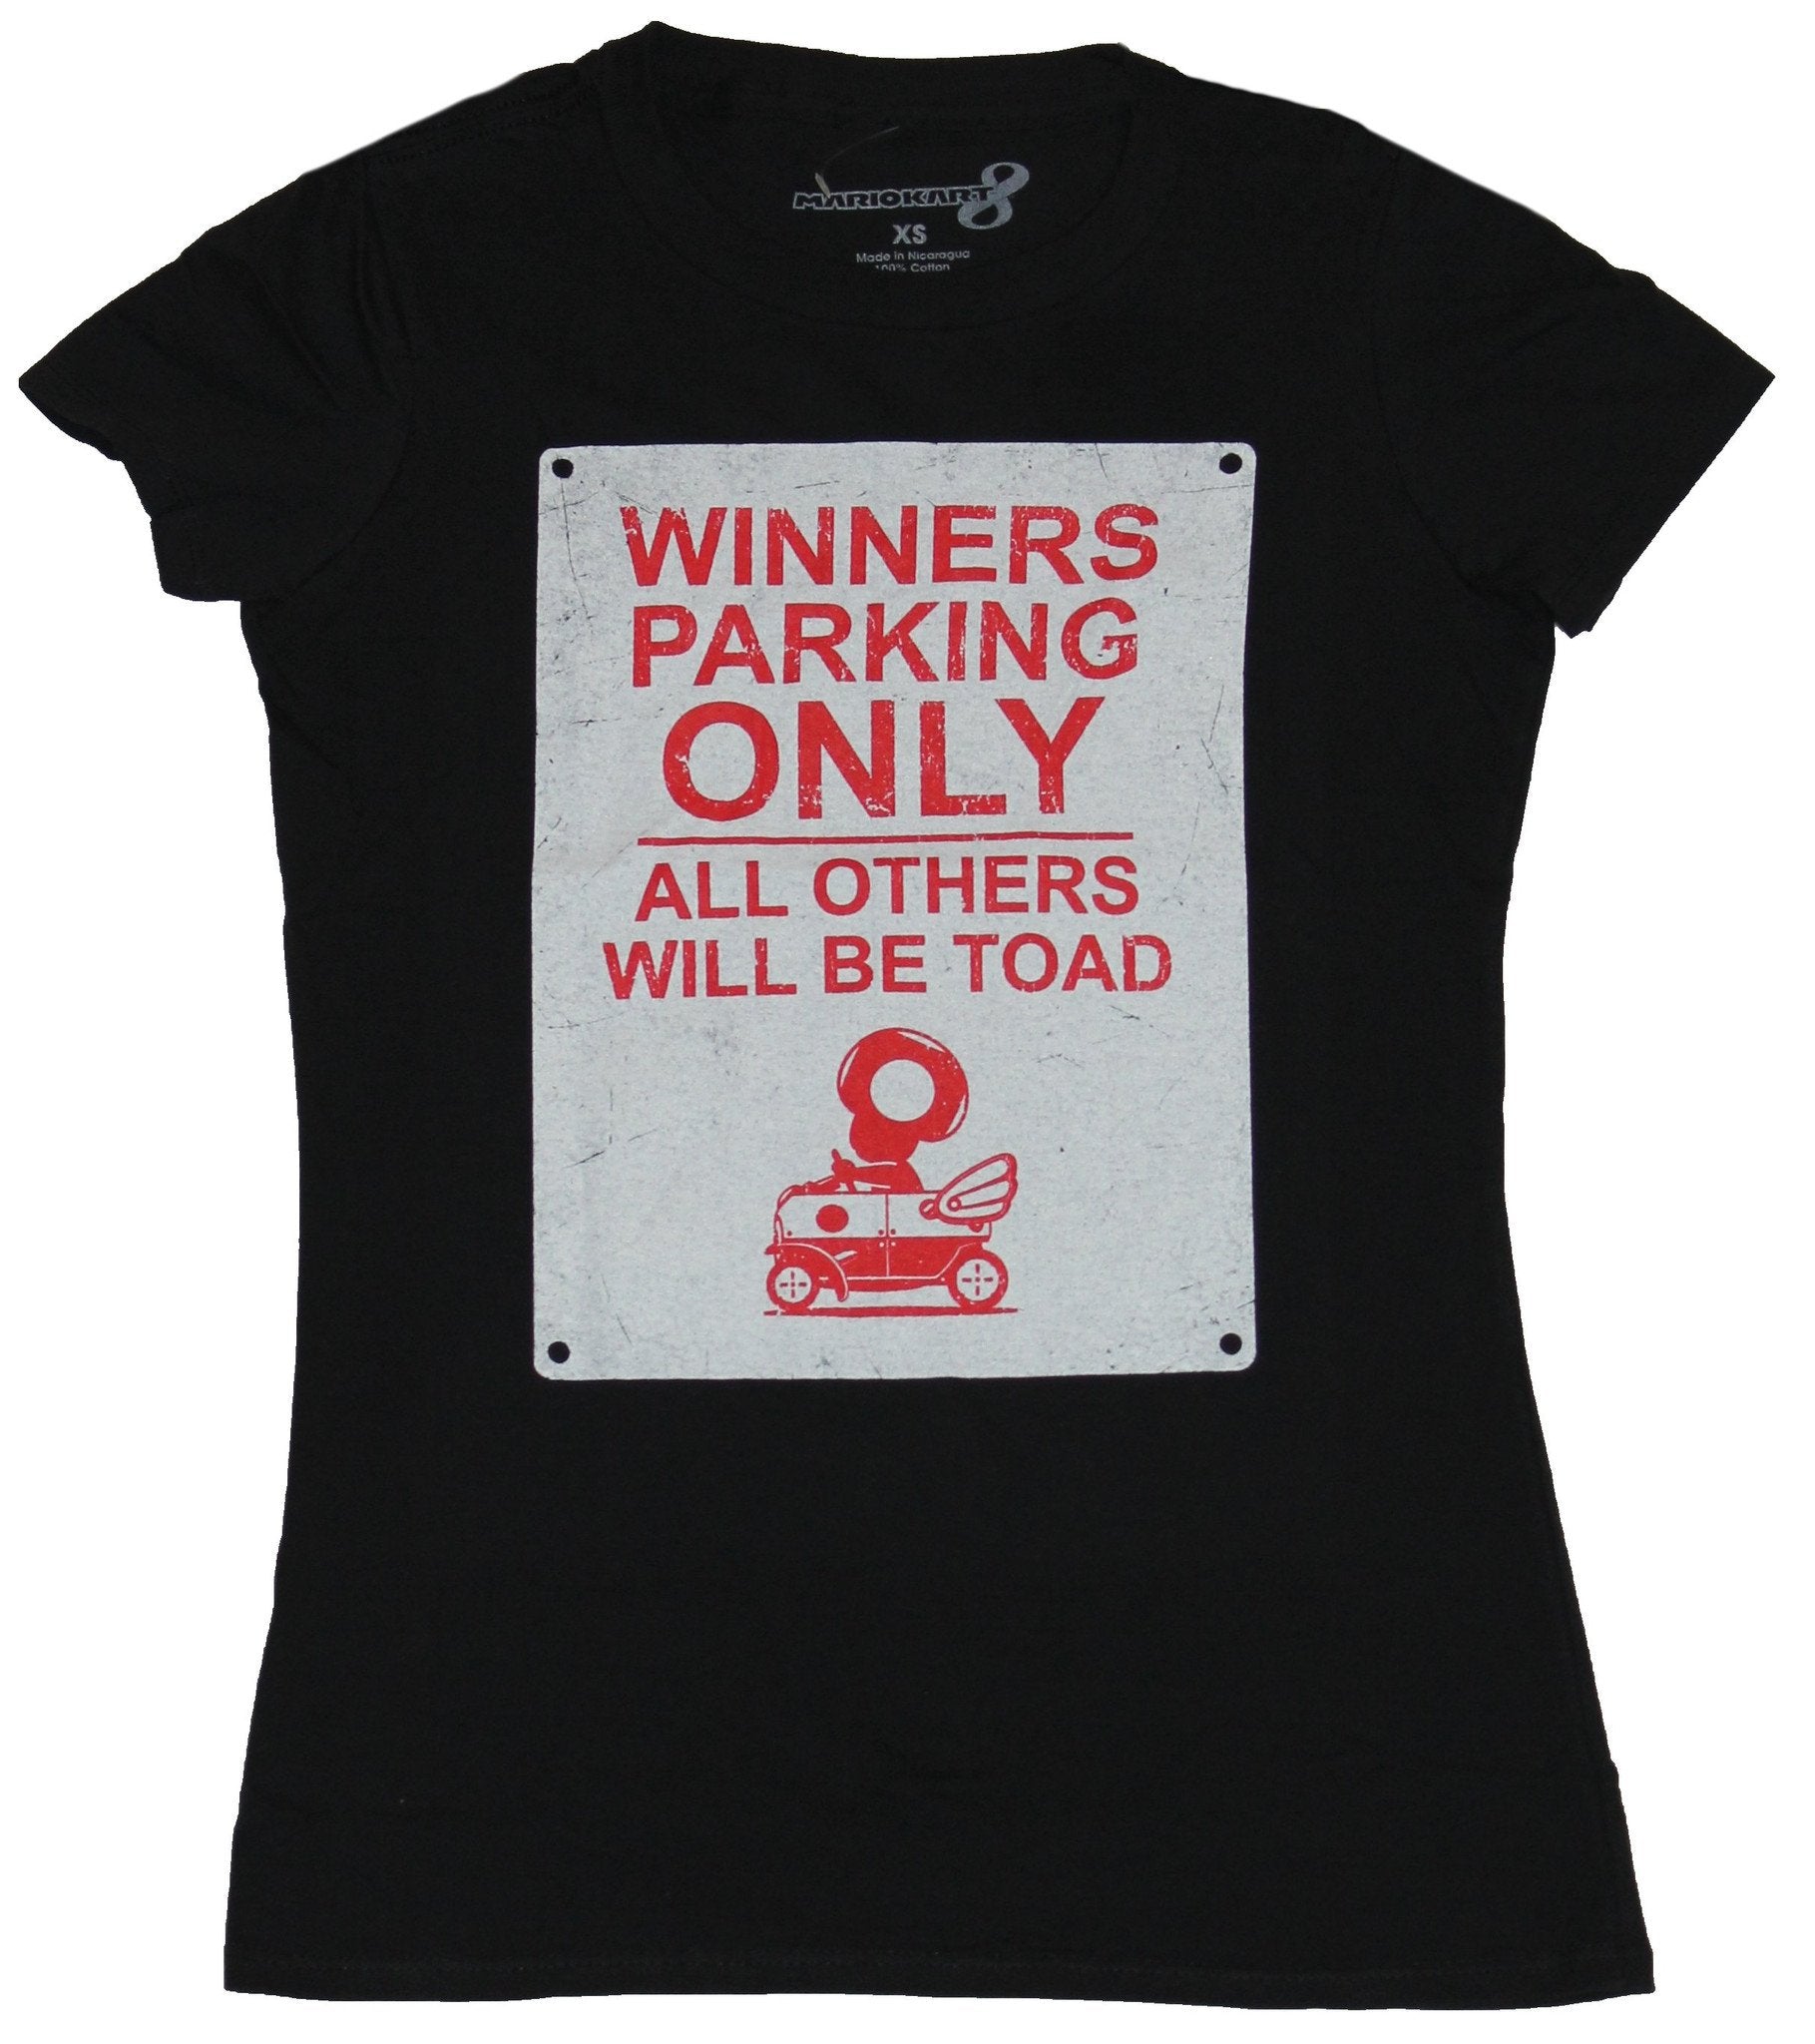 Mario Kart Girls Juniors T-Shirt - Winner's Parking Only All Others Toad